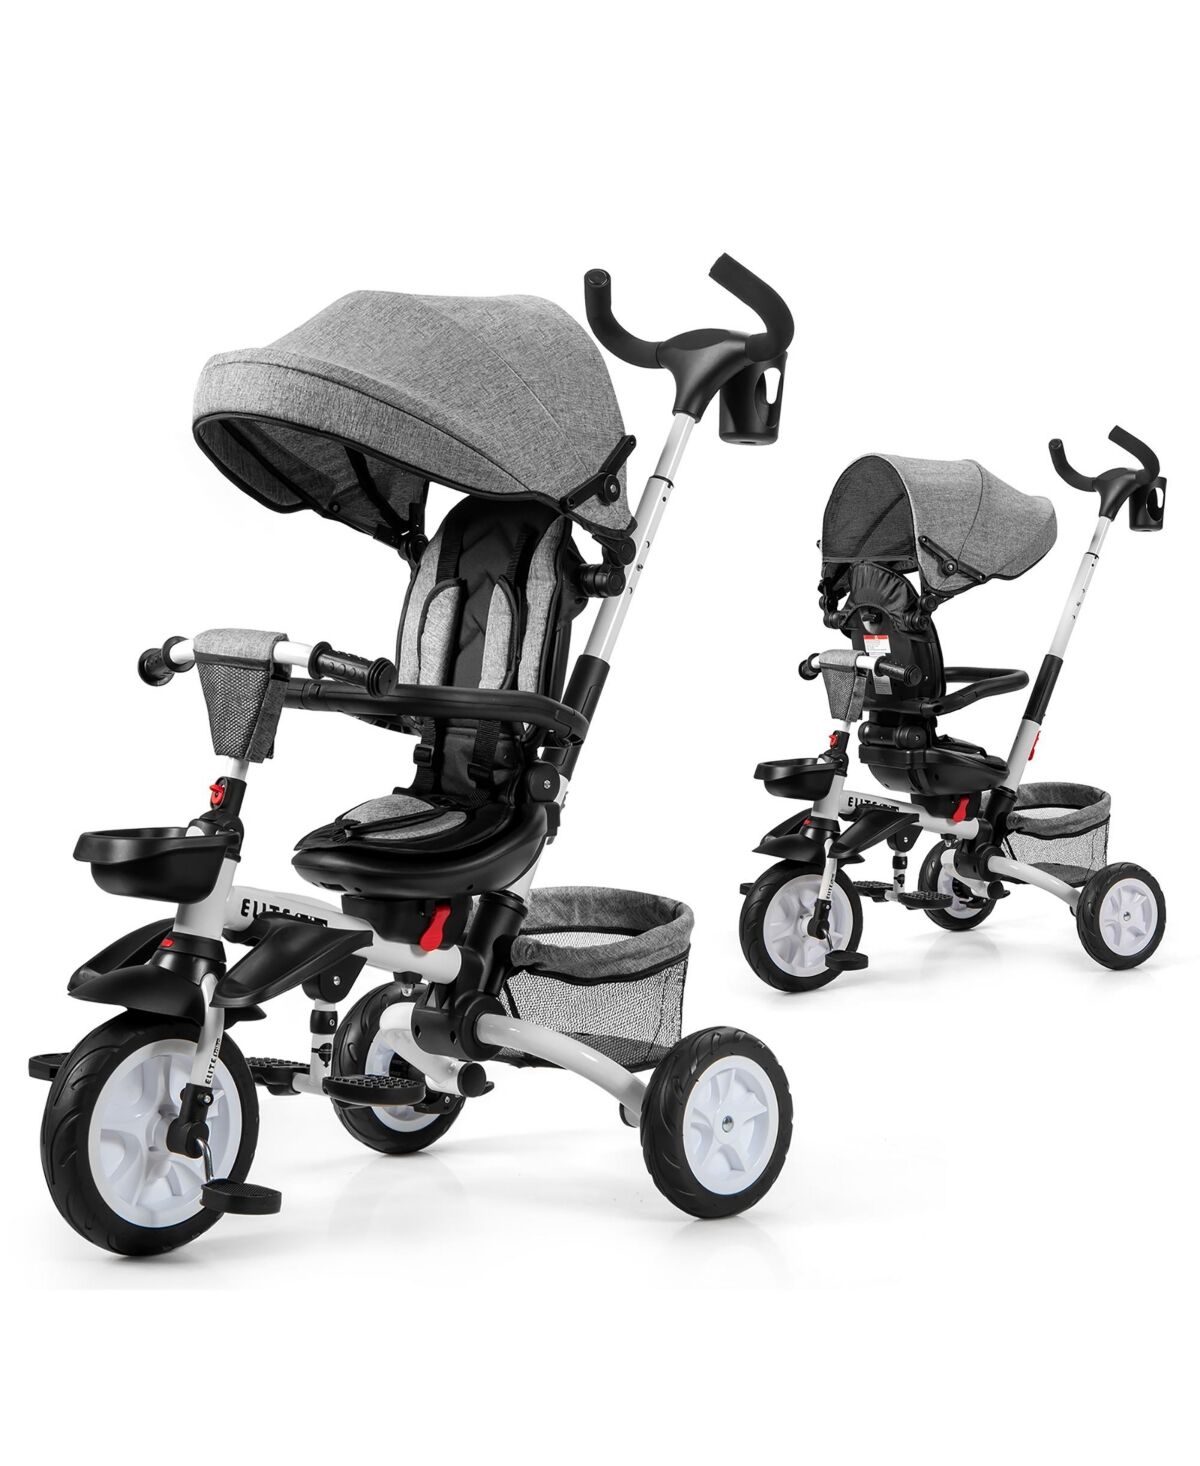 Costway 6-In-1 Kids Baby Stroller Tricycle Detachable Learning Toy Bike w/ Canopy - Grey